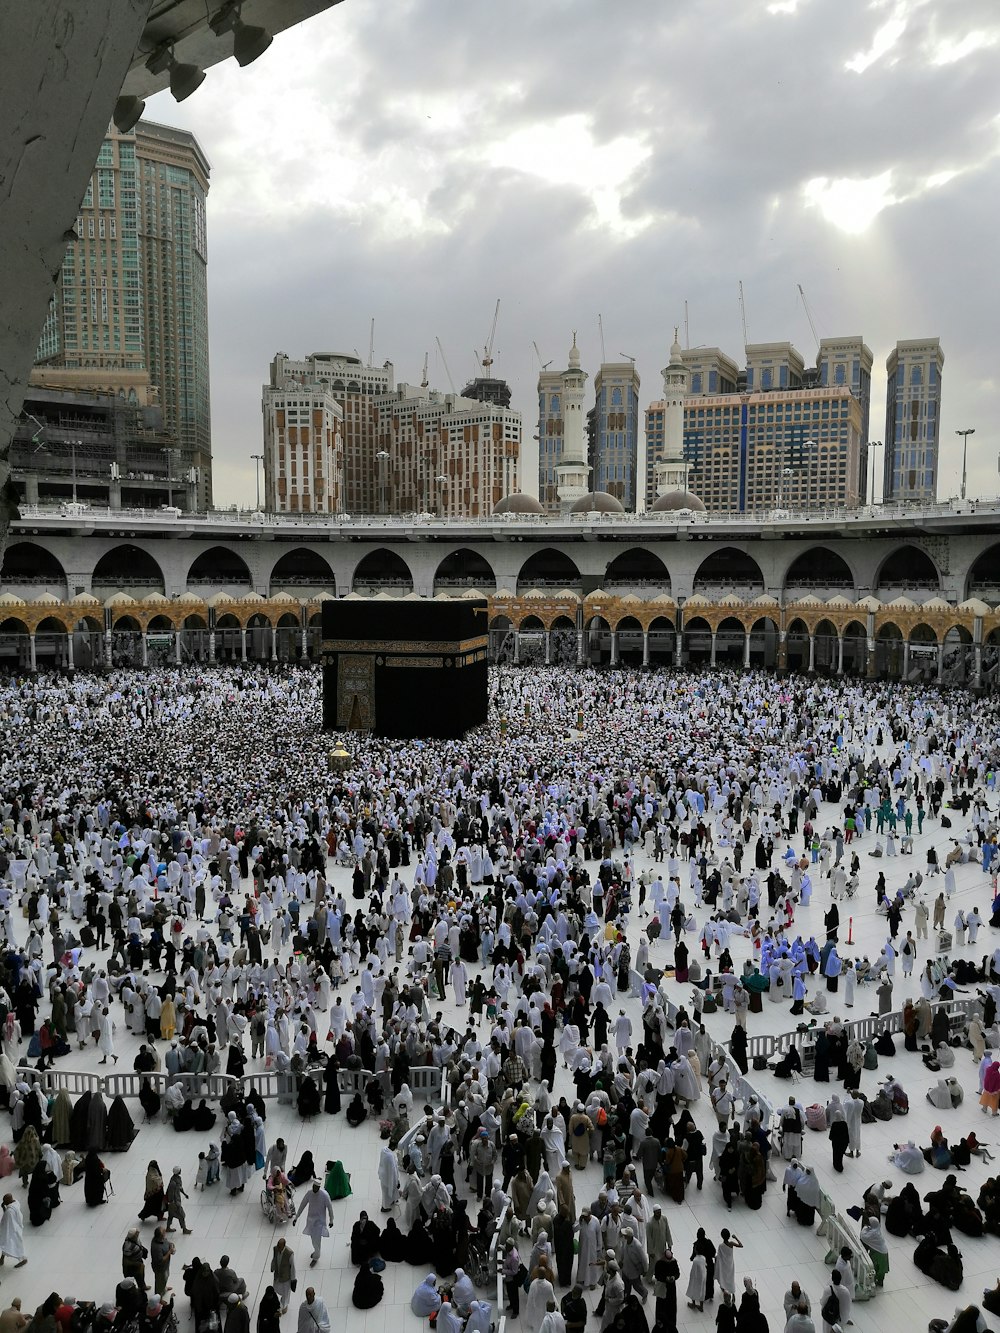 500 Mecca Kaaba Pictures Hd Download Free Images On Unsplash